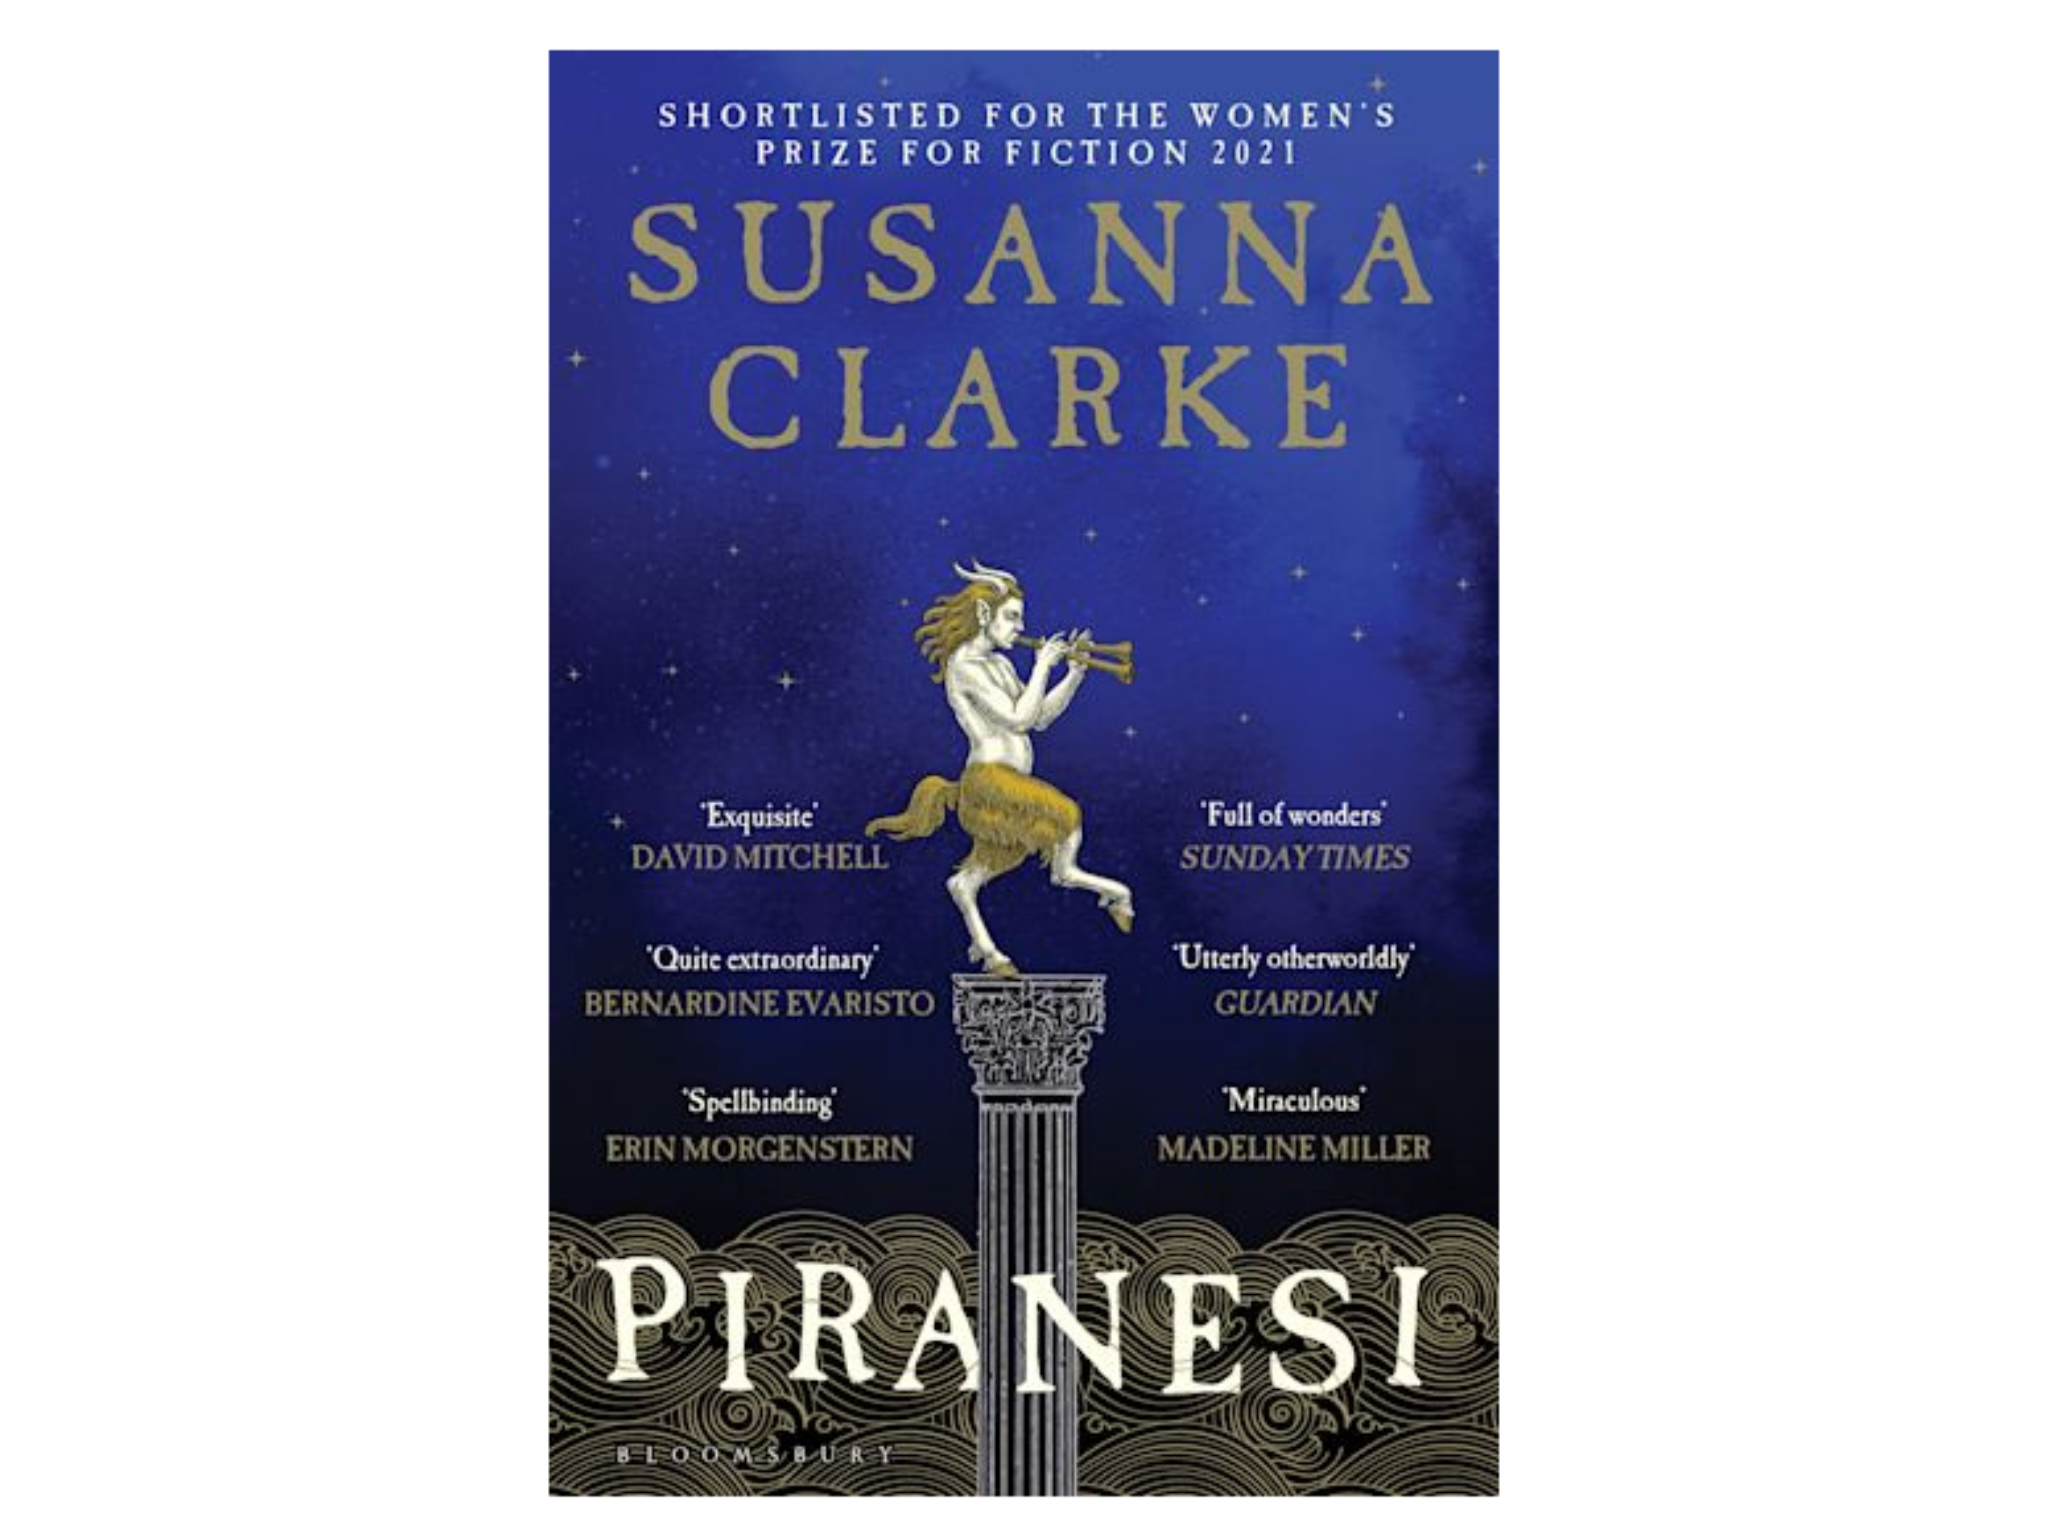 Piranesi-womens-prize-for-fiction-indybest.png